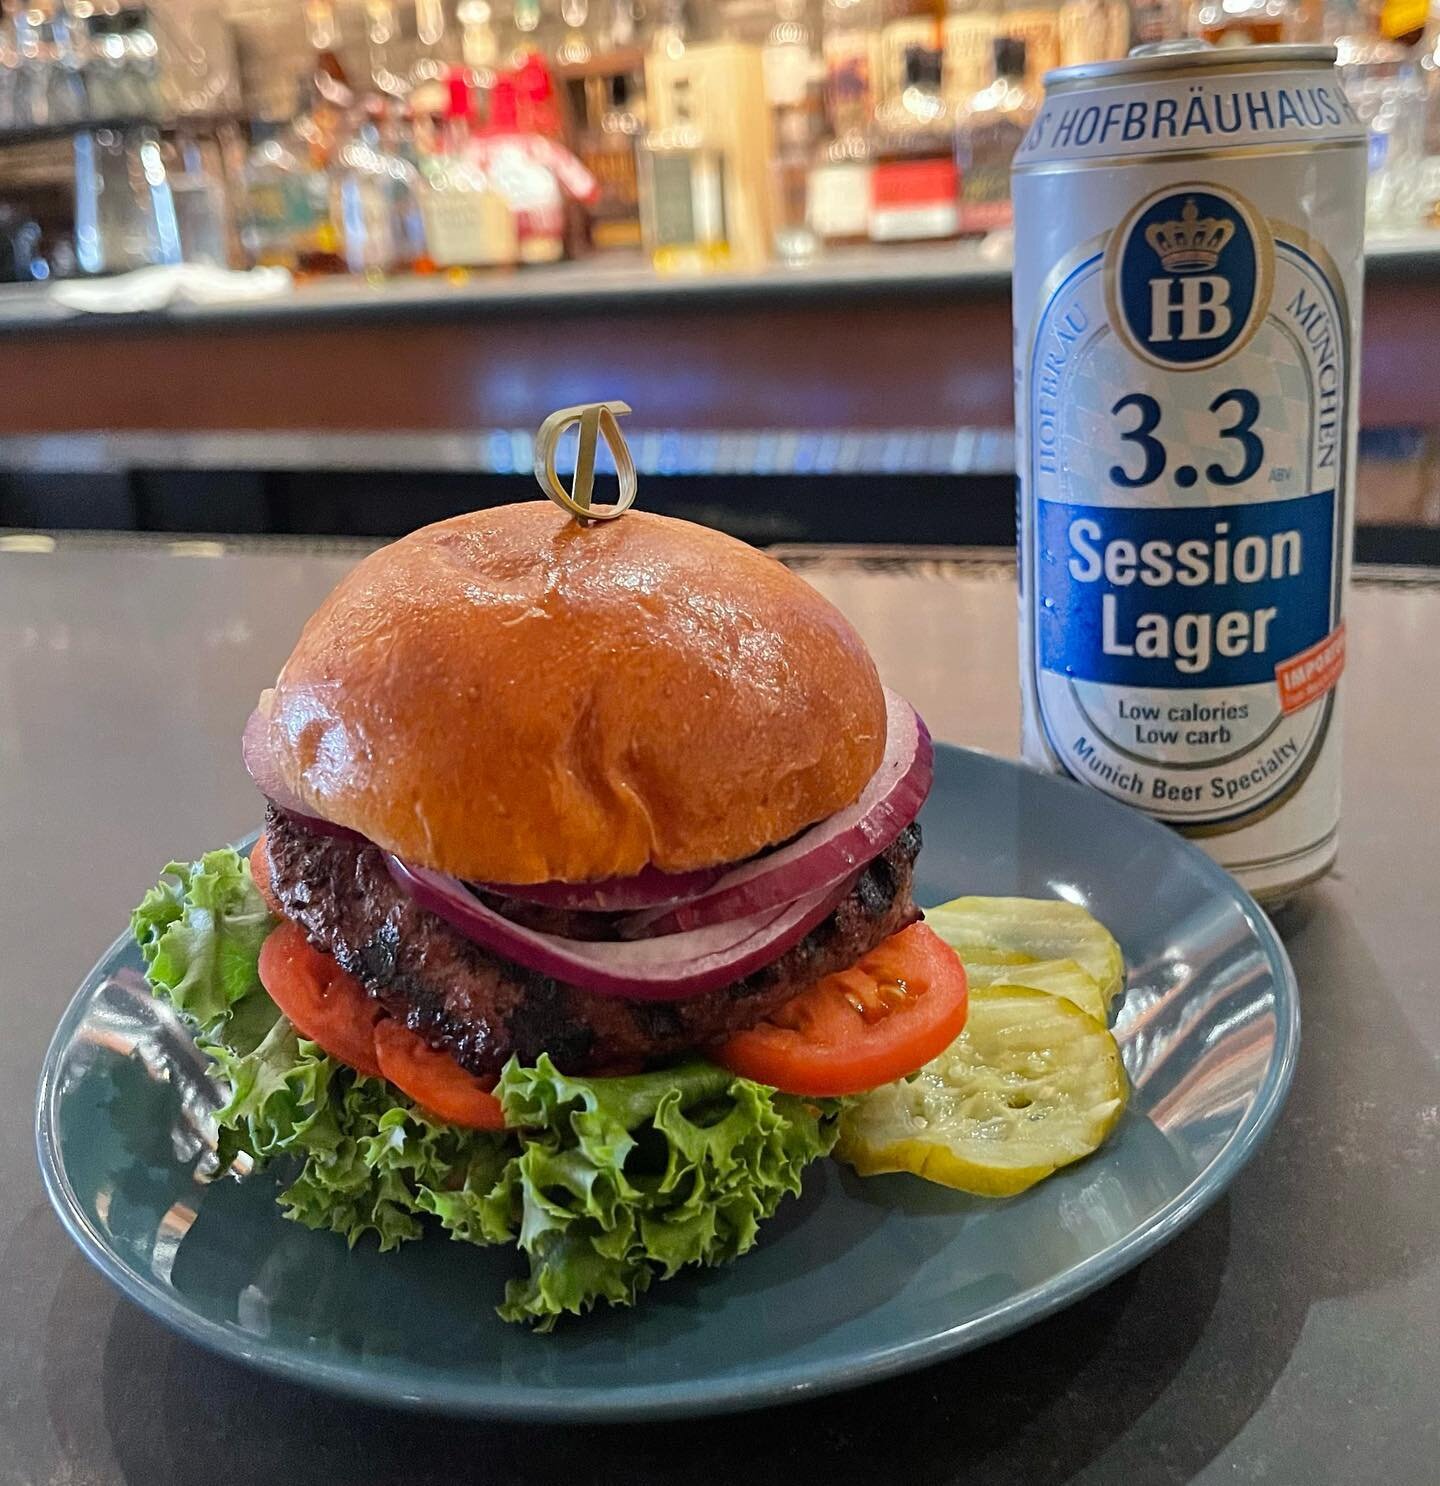 Our Happy Hour $10 Burger and Beer special will be around for a while. 
Join us Monday thru Friday from 4-6pm for this and many other liquid and solid specials to get your butts in our seats for #happyhour
.
#tastebetter #woodgrilled #burgers #hofbra